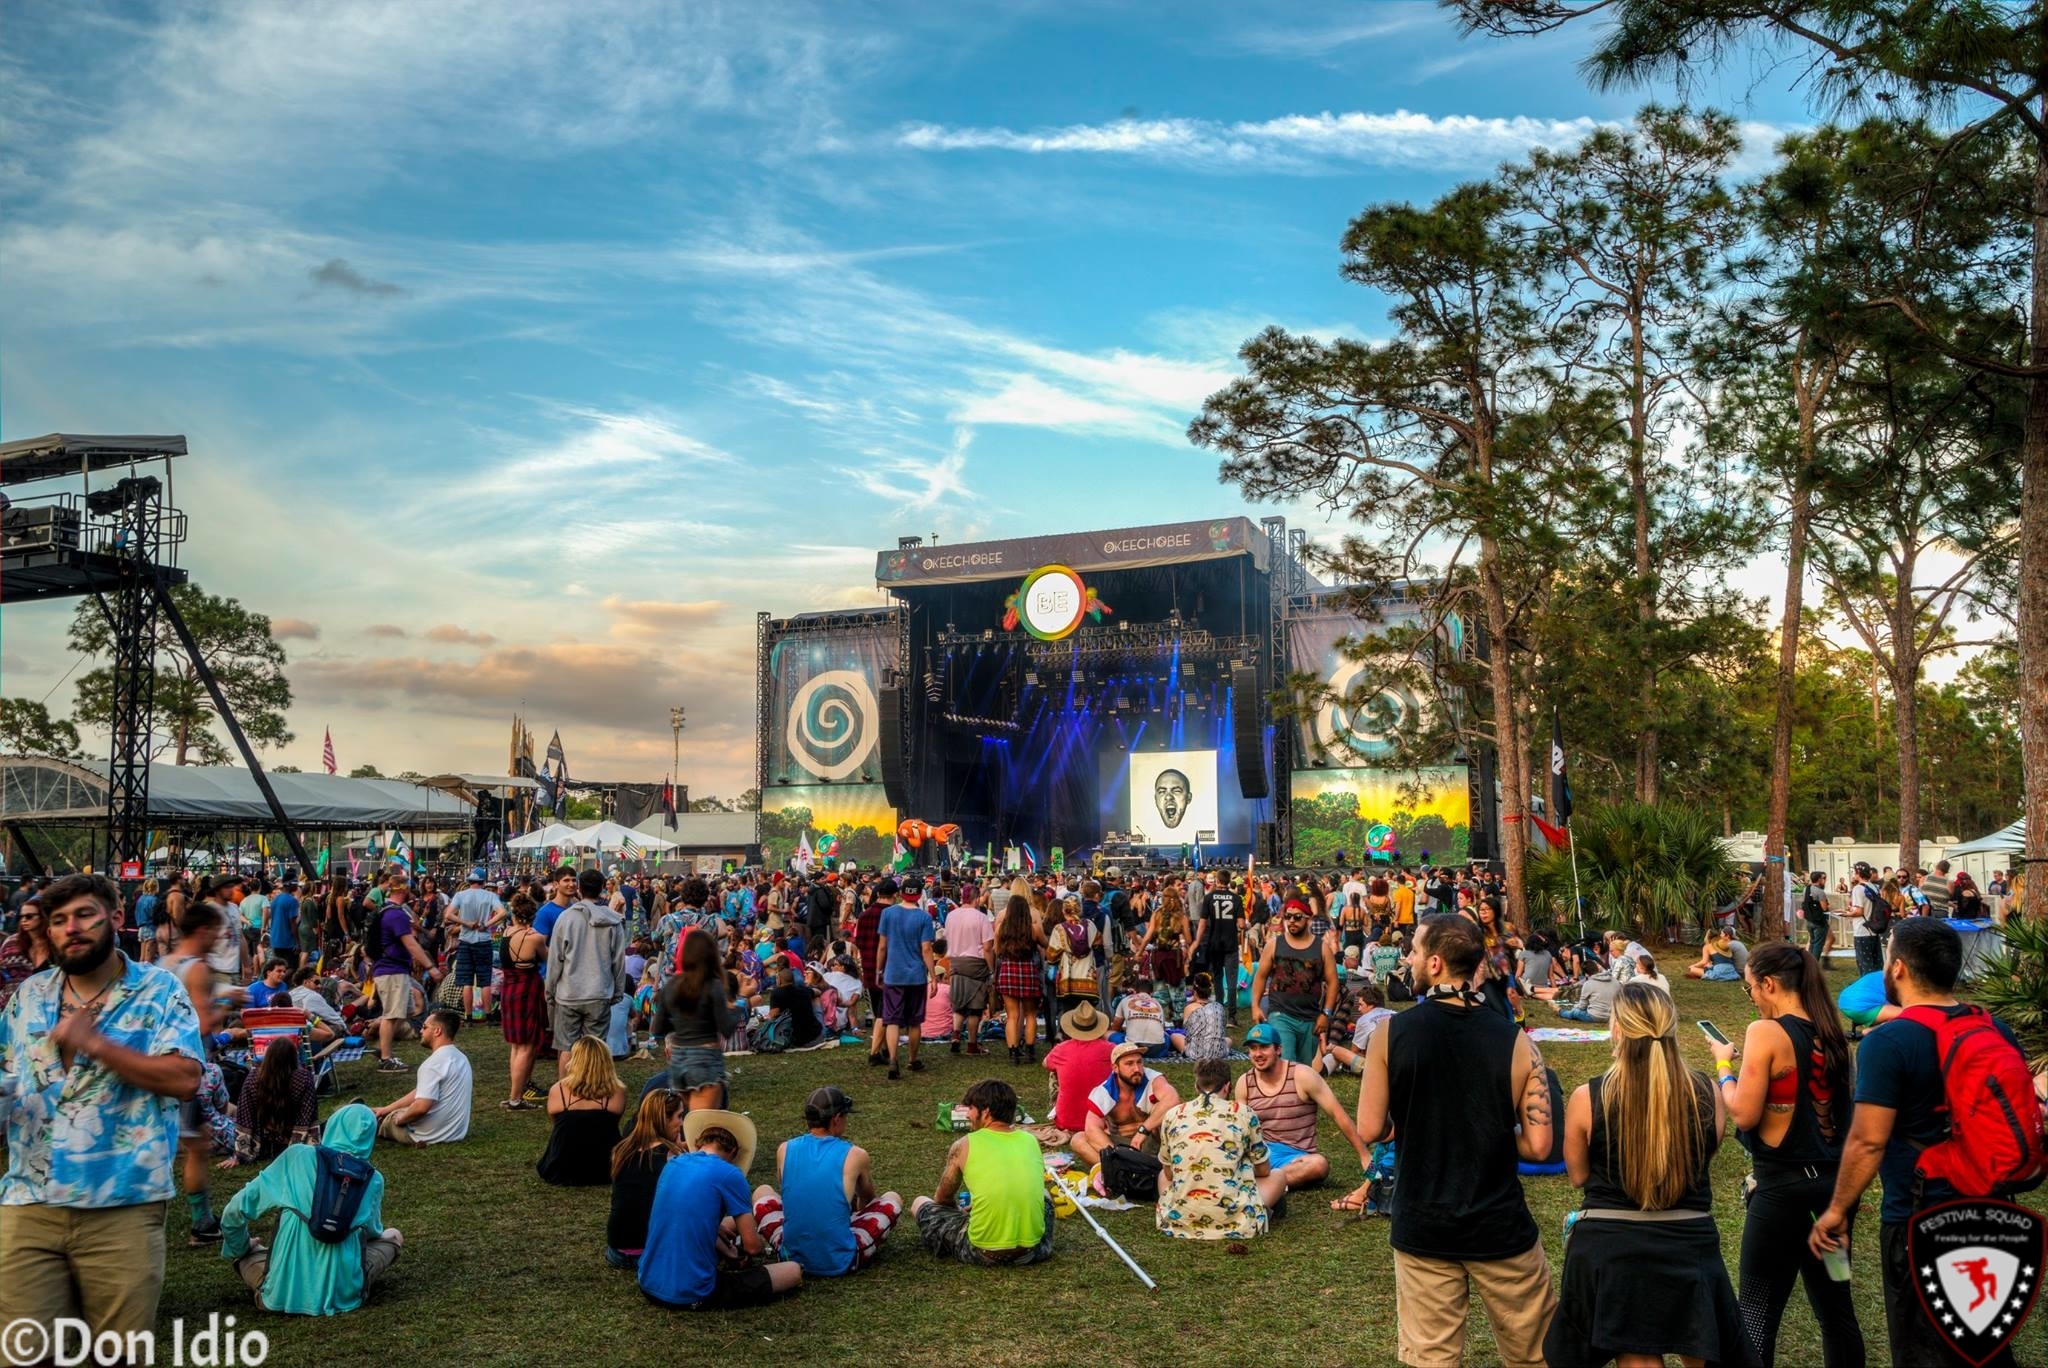 Enter The Portal and Discover These 3 Artists at Okeechobee Festival